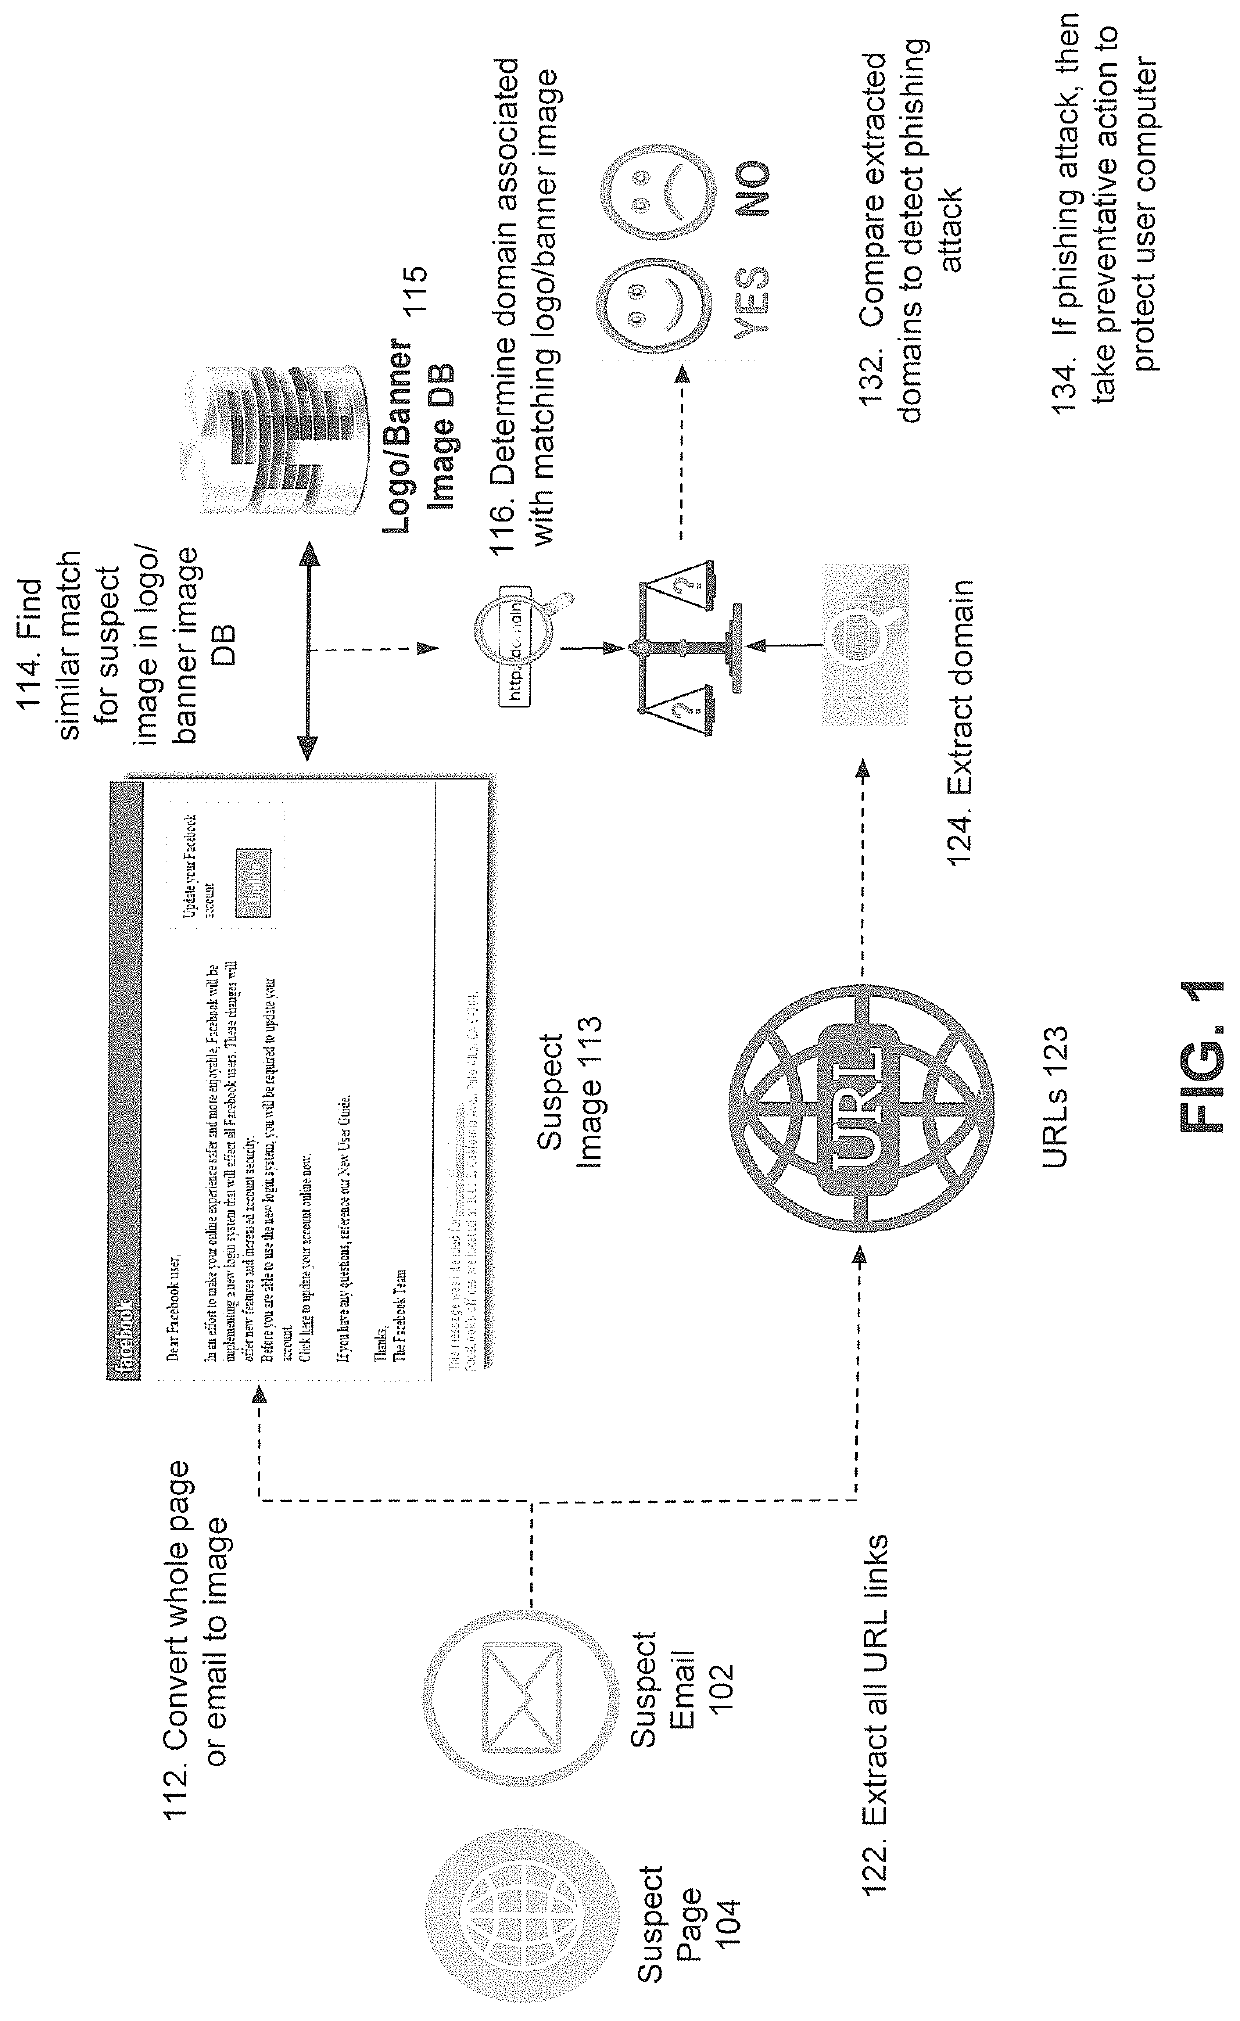 Anti-phishing system and method using computer vision to match identifiable key information